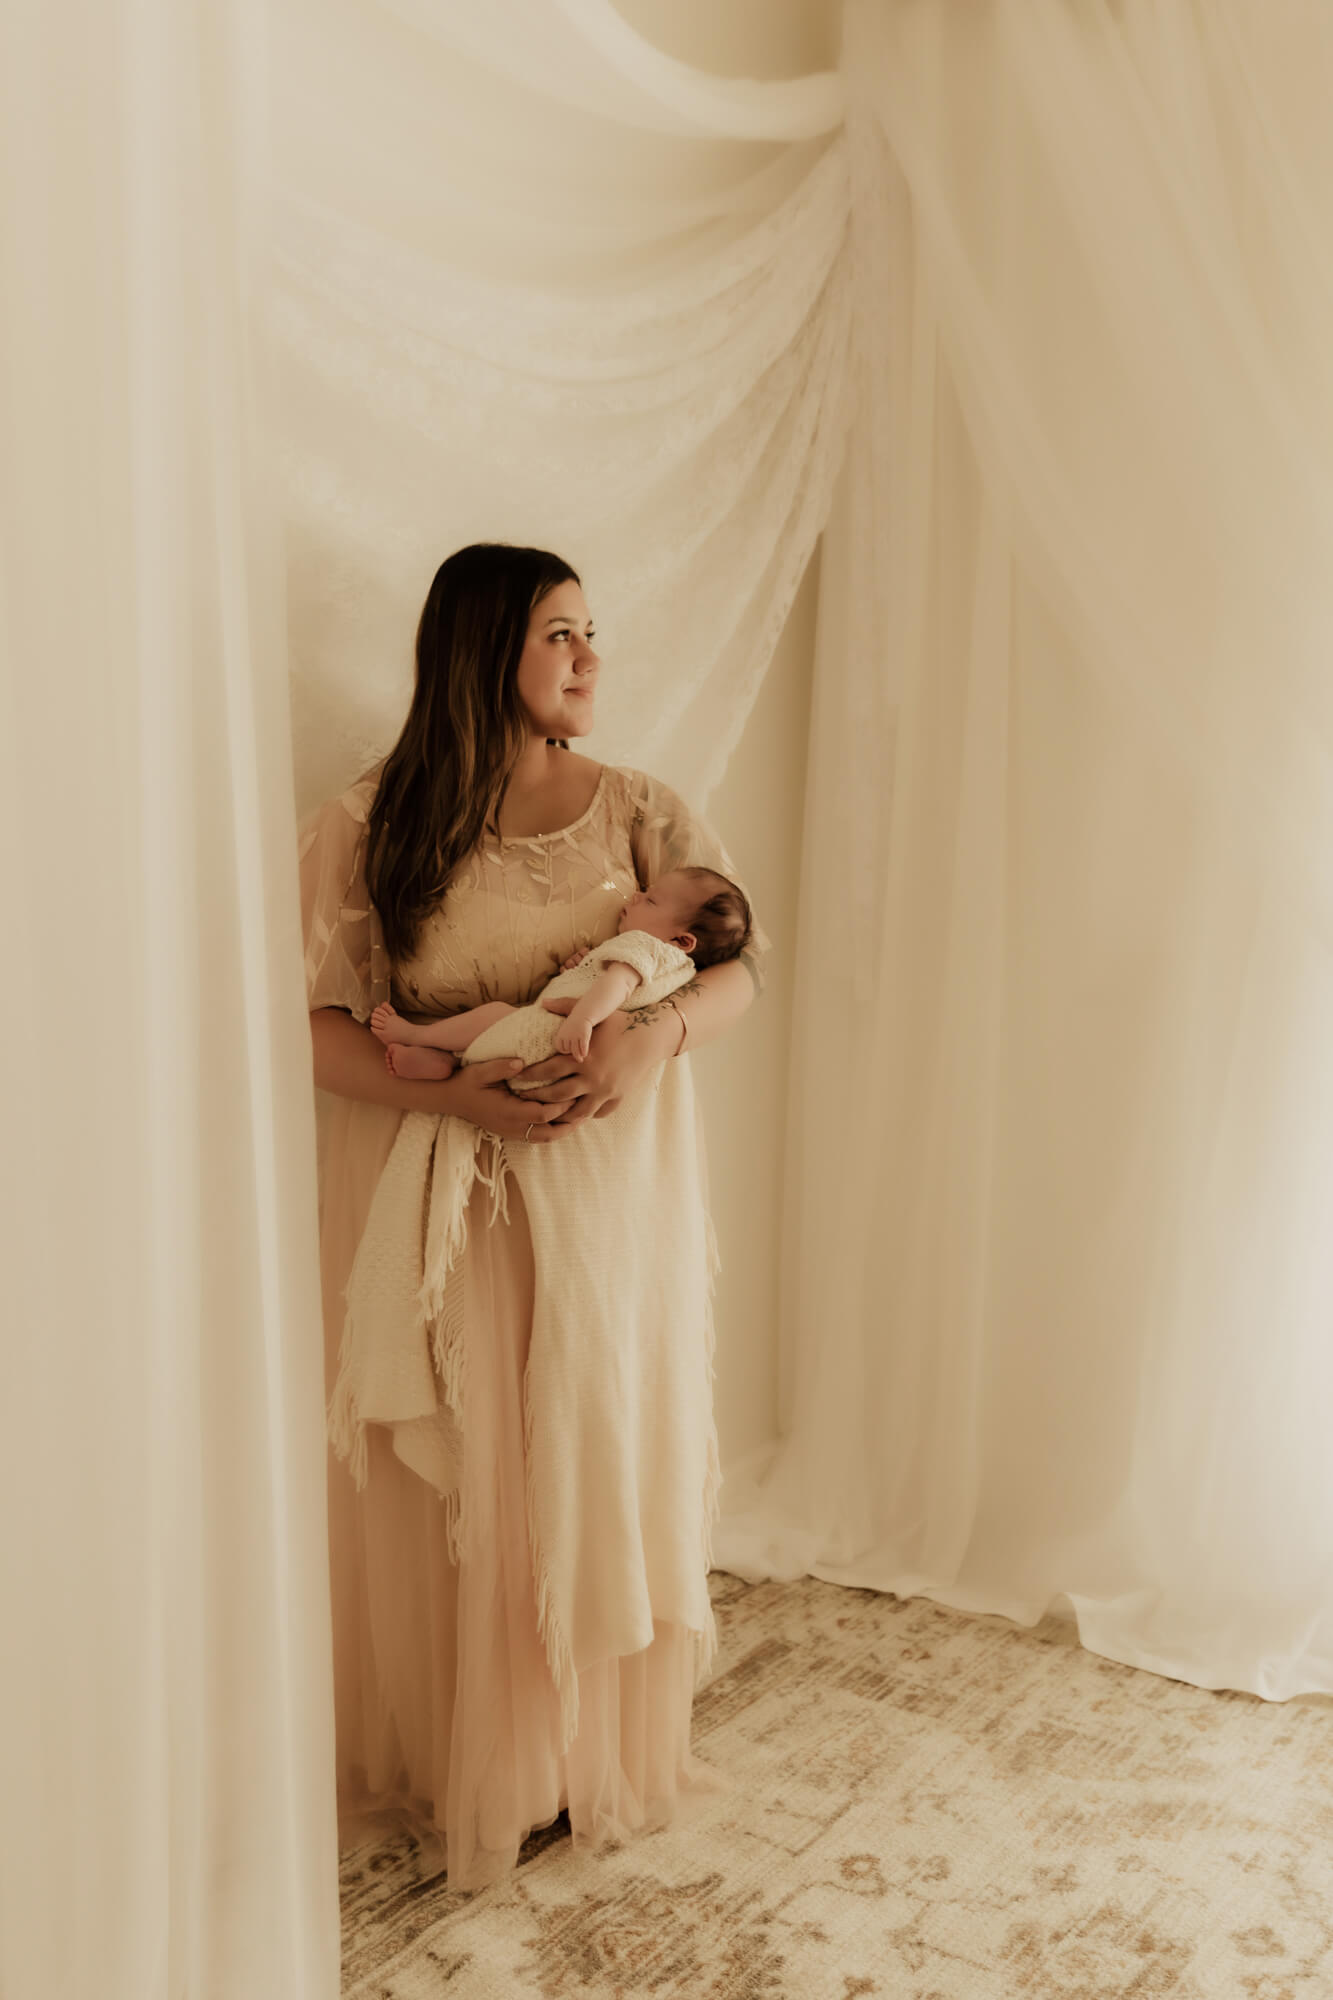 A mother stands in a corner of a room surrounded by drapes while holding her sleeping newborn baby